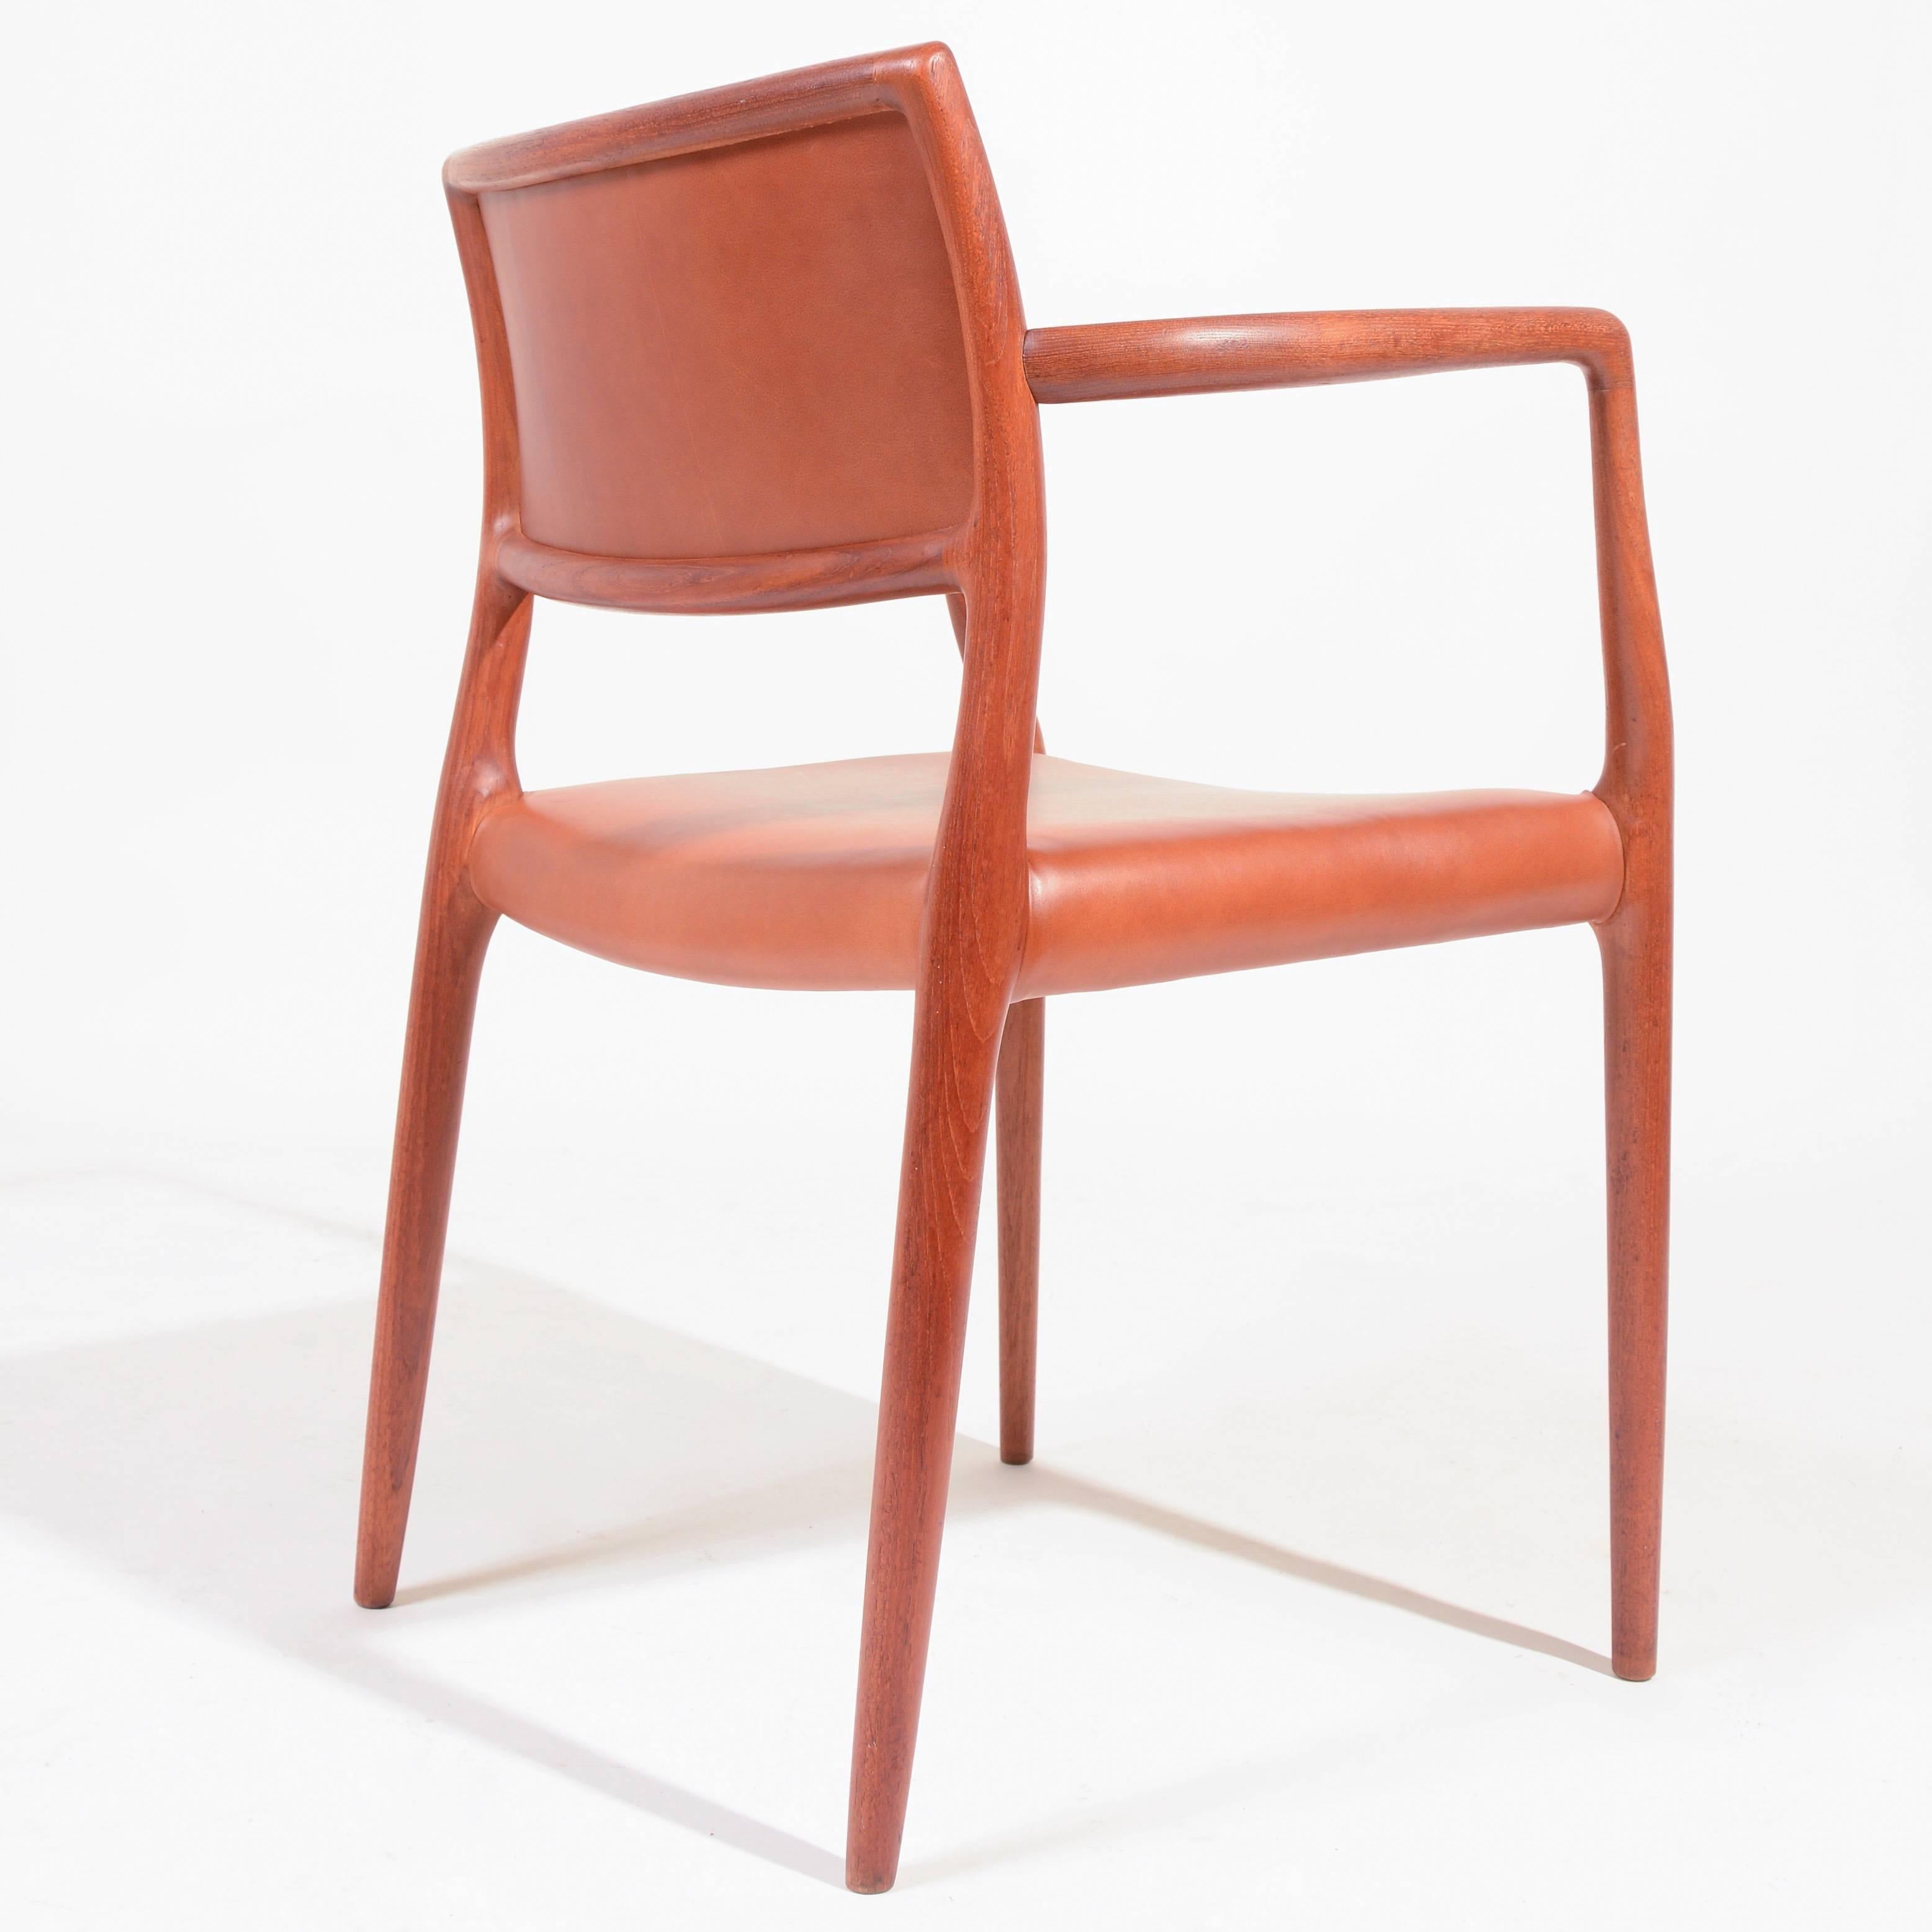 Mid-20th Century Set of Four J.L. Møller Model 80 Dining Chairs by Niels Møller in Leather